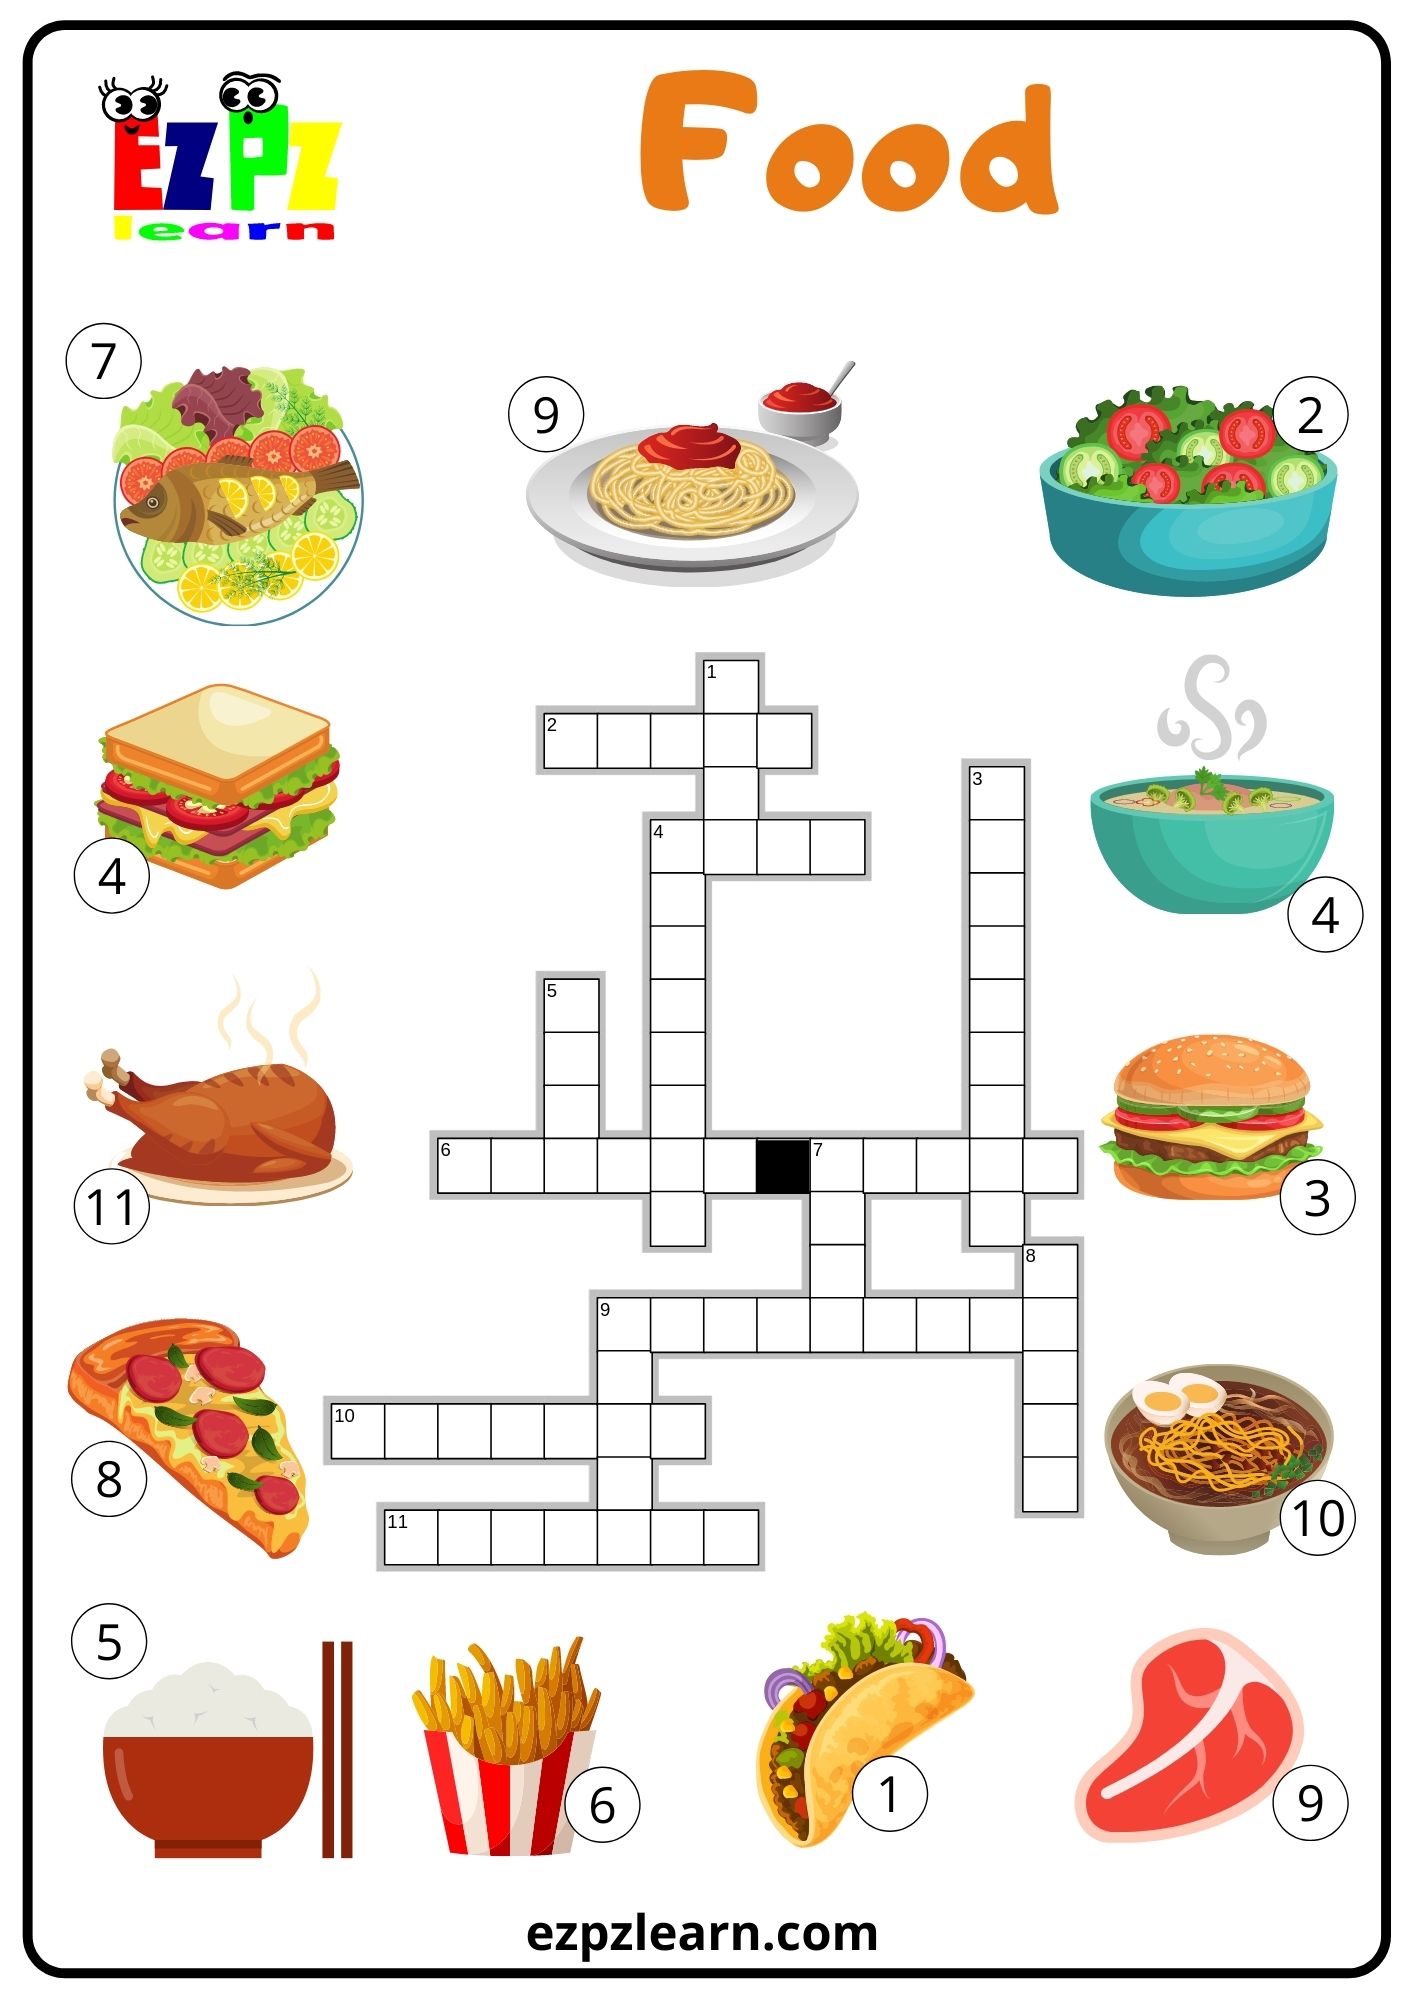 Crossword for kids. Crossword food and Drinks 5 класс. Кроссворд по теме food. Кроссворд по английскому на тему еда. Кроссворд по теме еда.напитки.